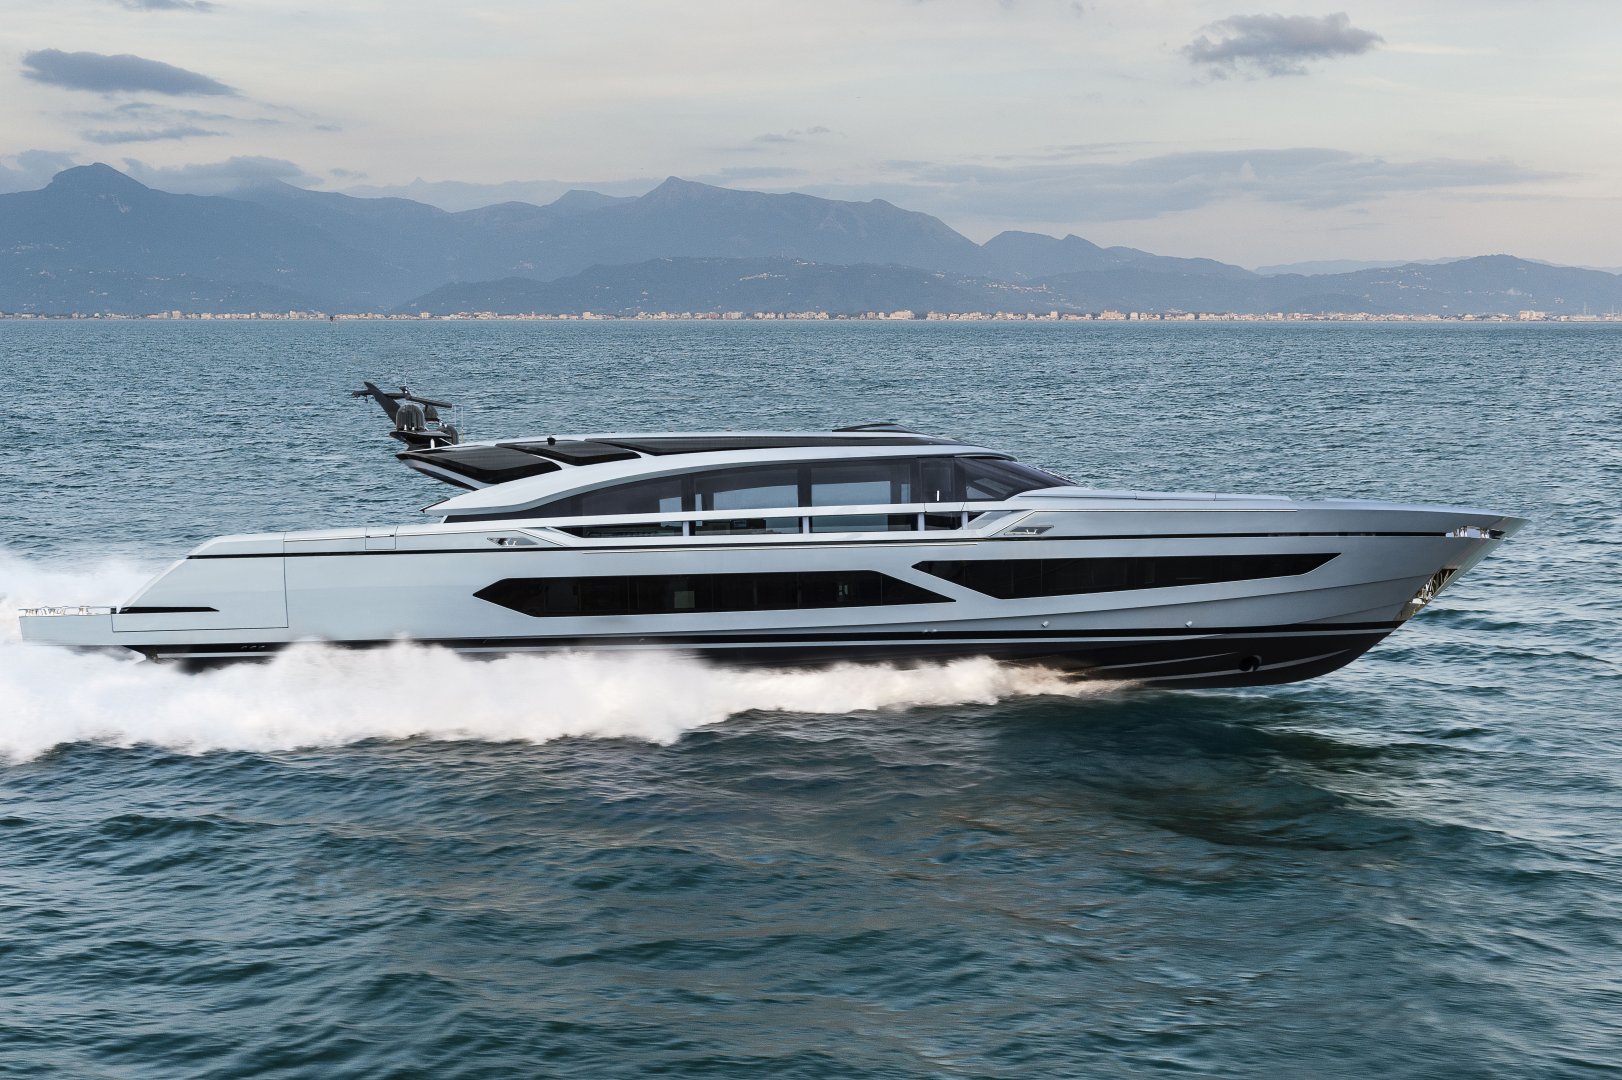 THE PLEASURE OF SPEEDING AND THE FREEDOM OF OUTDOOR LIFE AT SEA.  A NEW OWNER HAS CHOSEN AB125